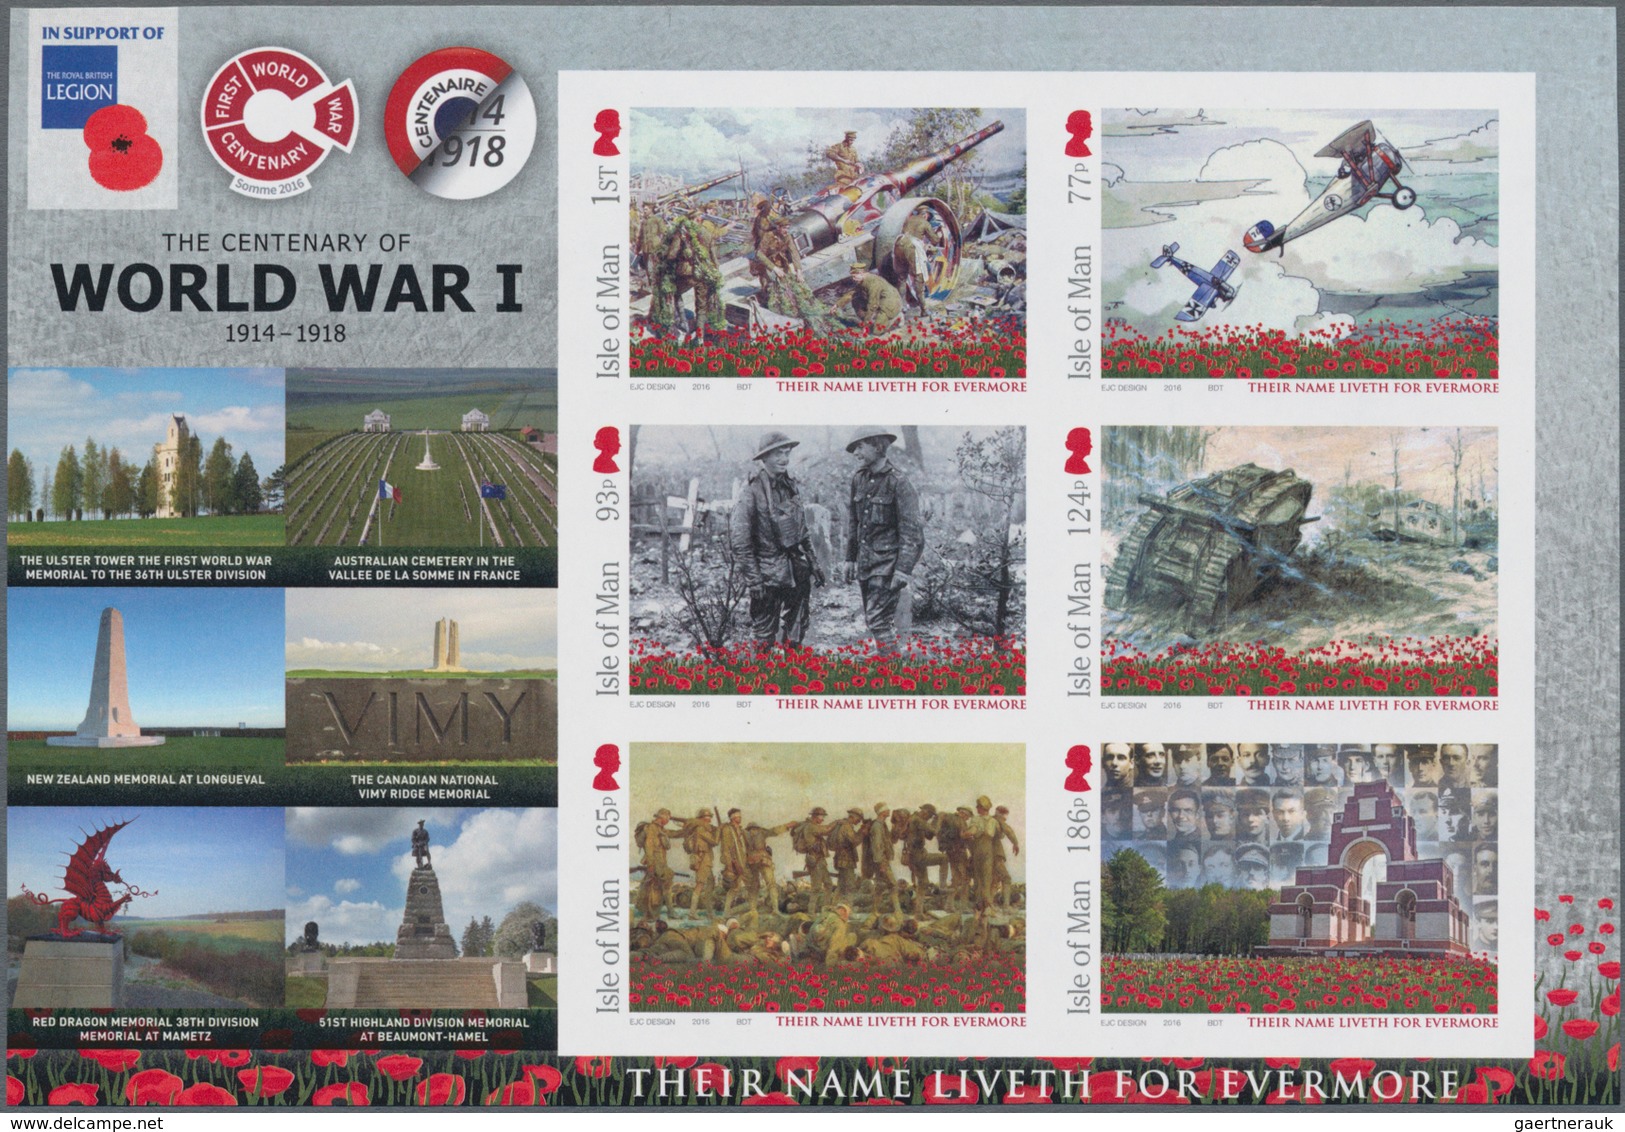 Großbritannien - Isle Of Man: 2016. IMPERFORATE Souvenir Sheet Of 6 For The Issue "100th Anniversary - Isla De Man